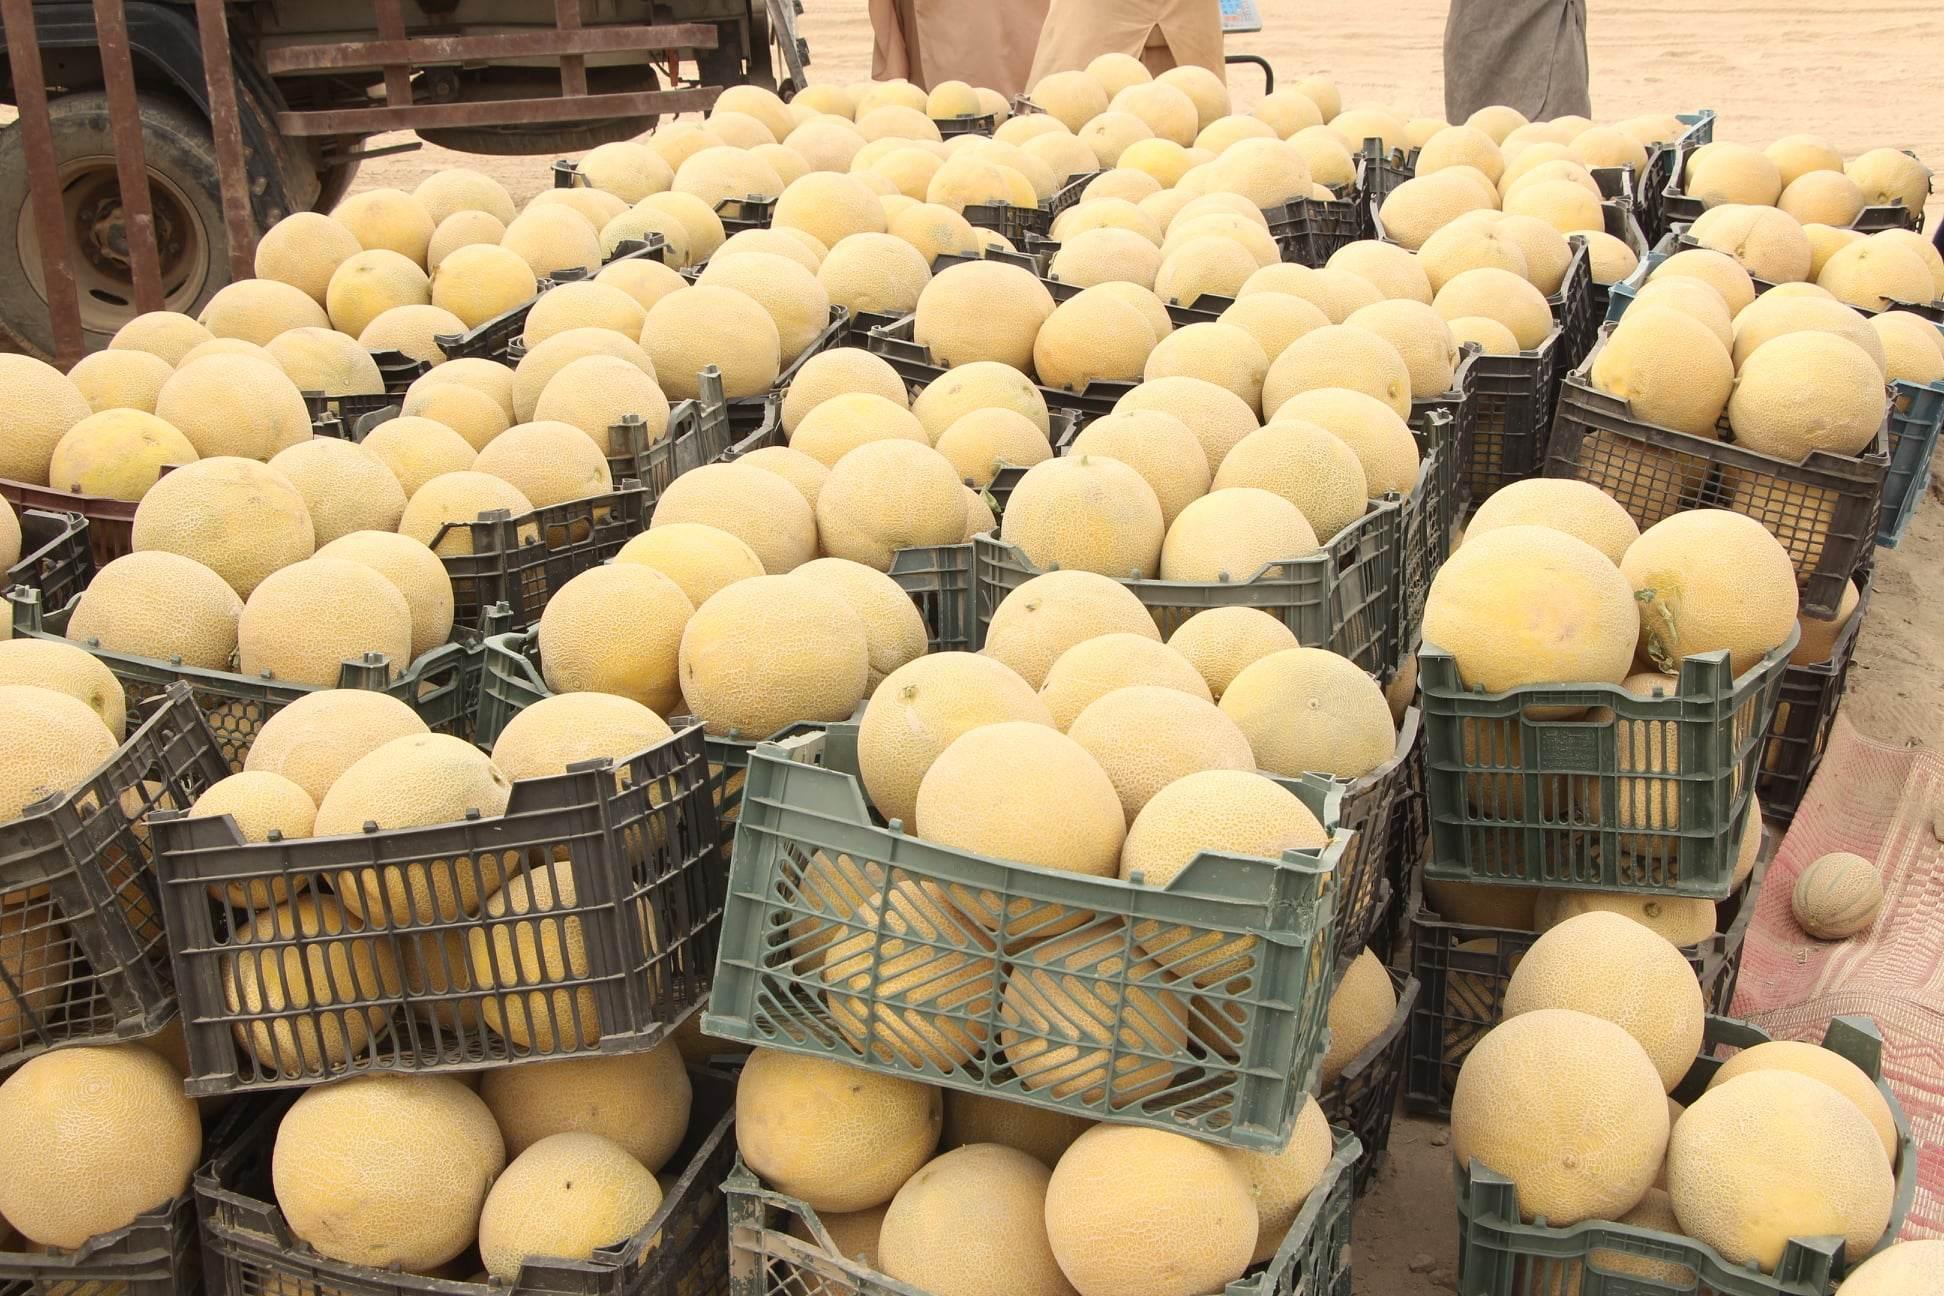 Melon yield estimated at 130,000 tons in Kunduz